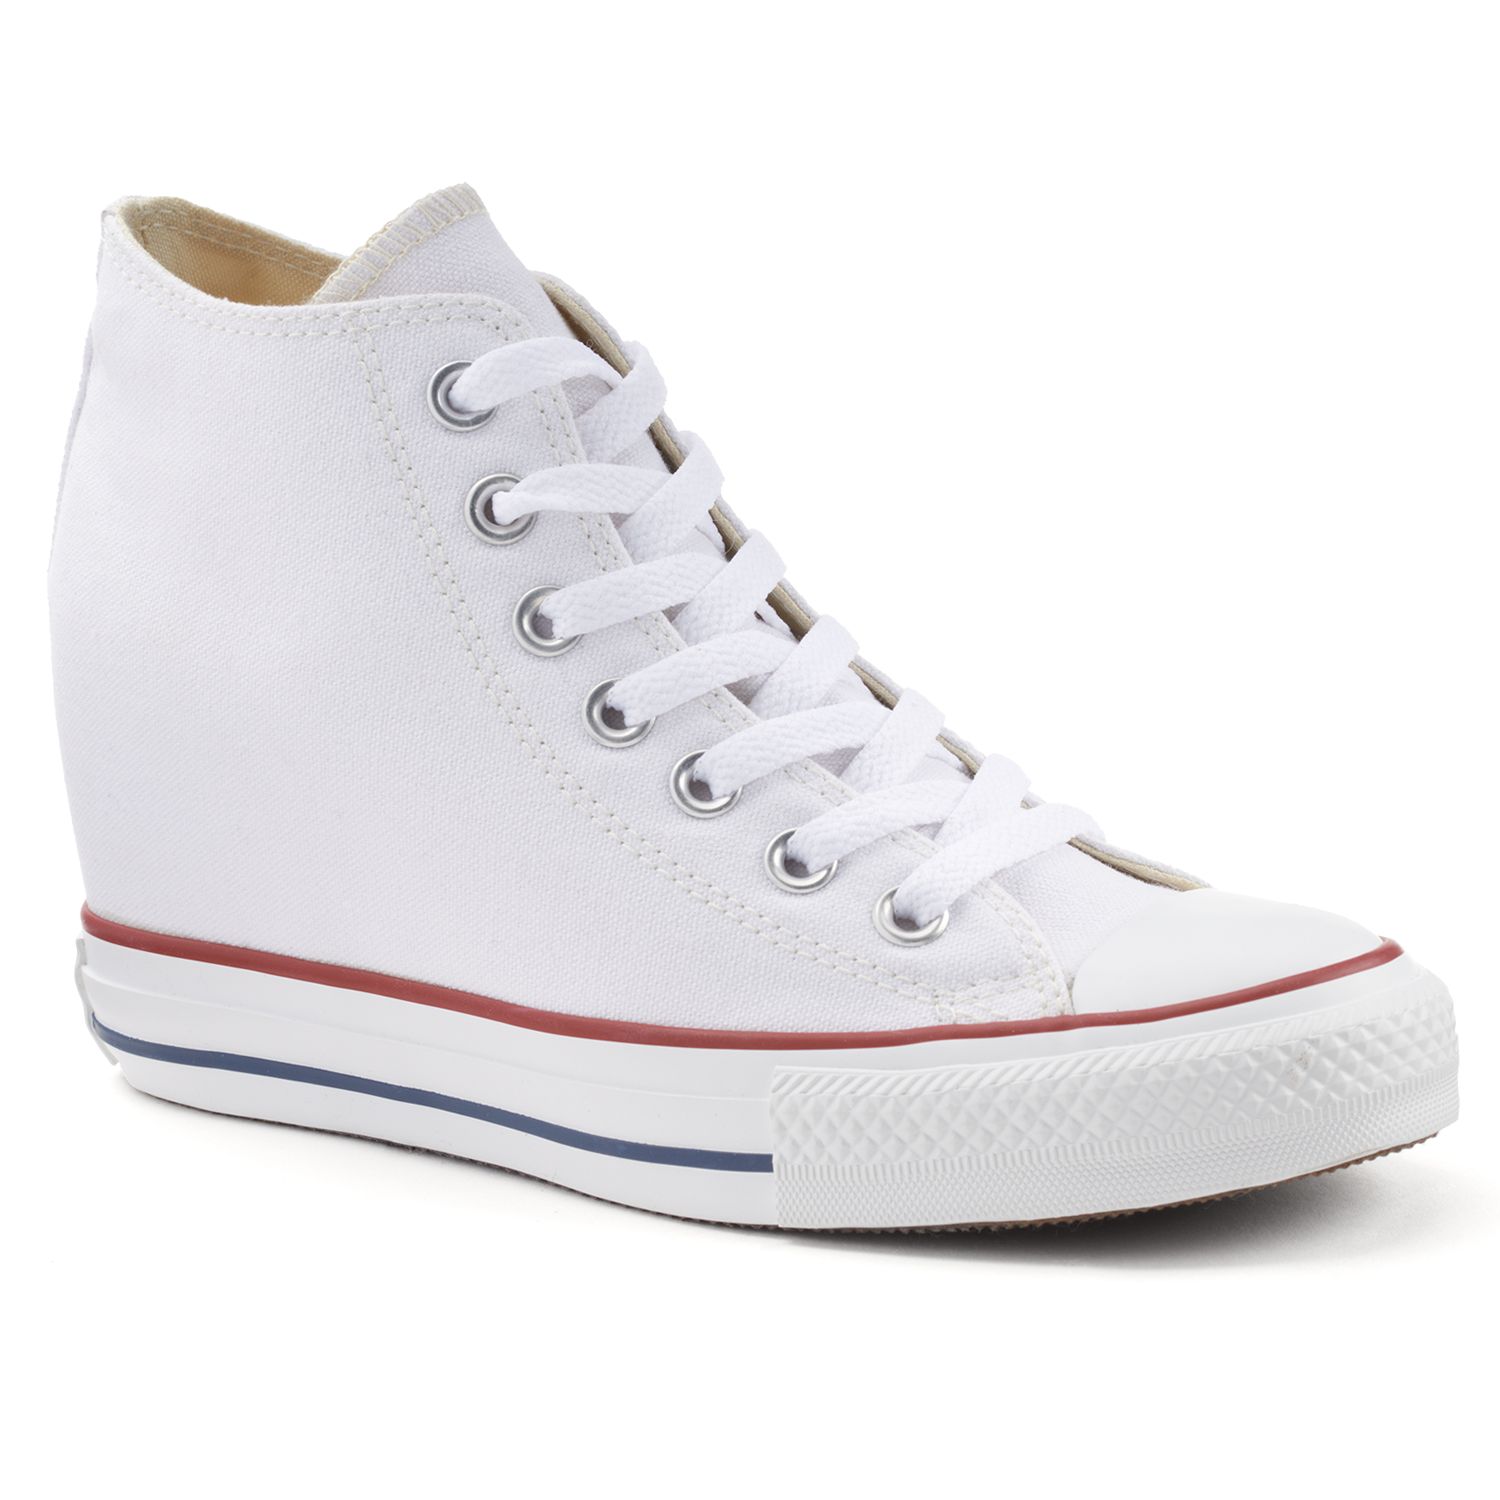 chuck taylor all star lux